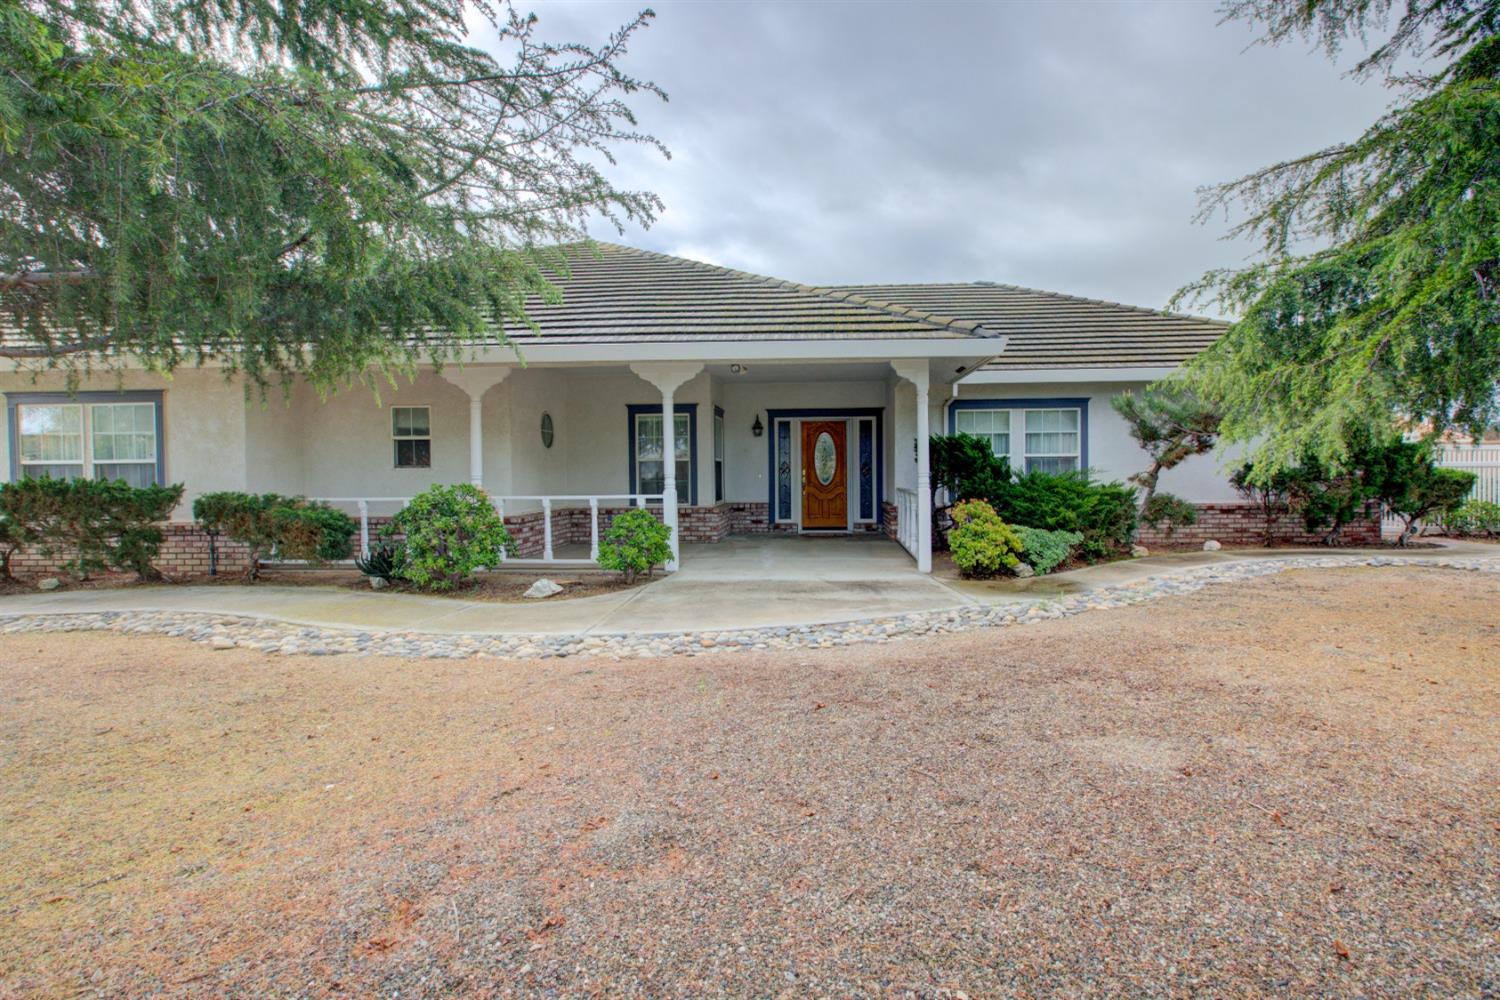 Photo of 7906 W Bates Rd in Tracy, CA